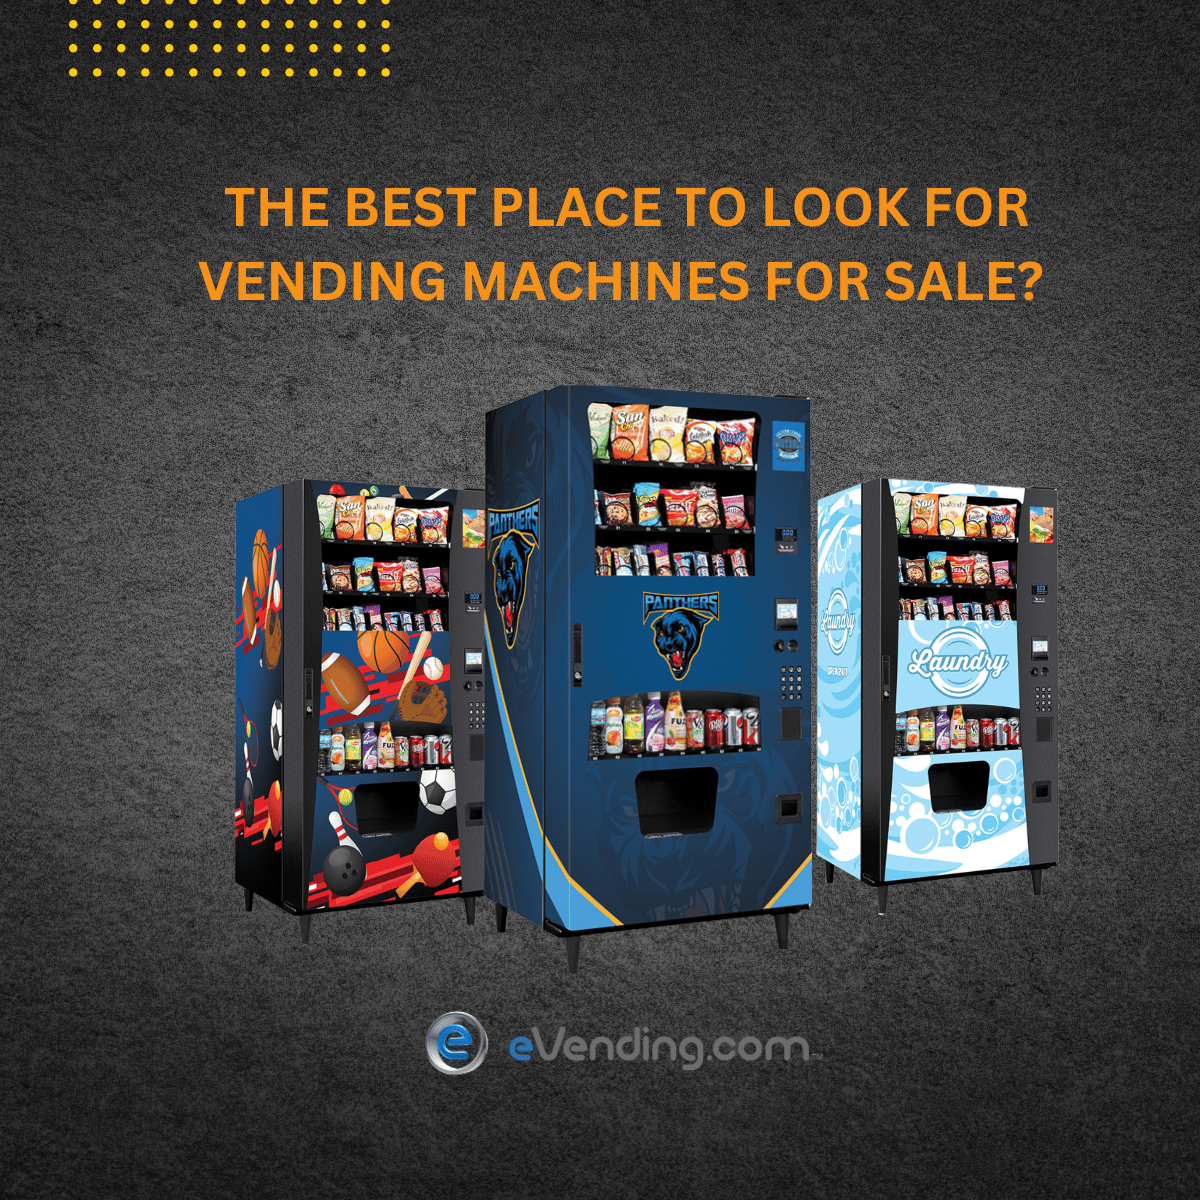 WHERE IS THE BEST PLACE TO LOOK FOR VENDING MACHINES FOR SALE?